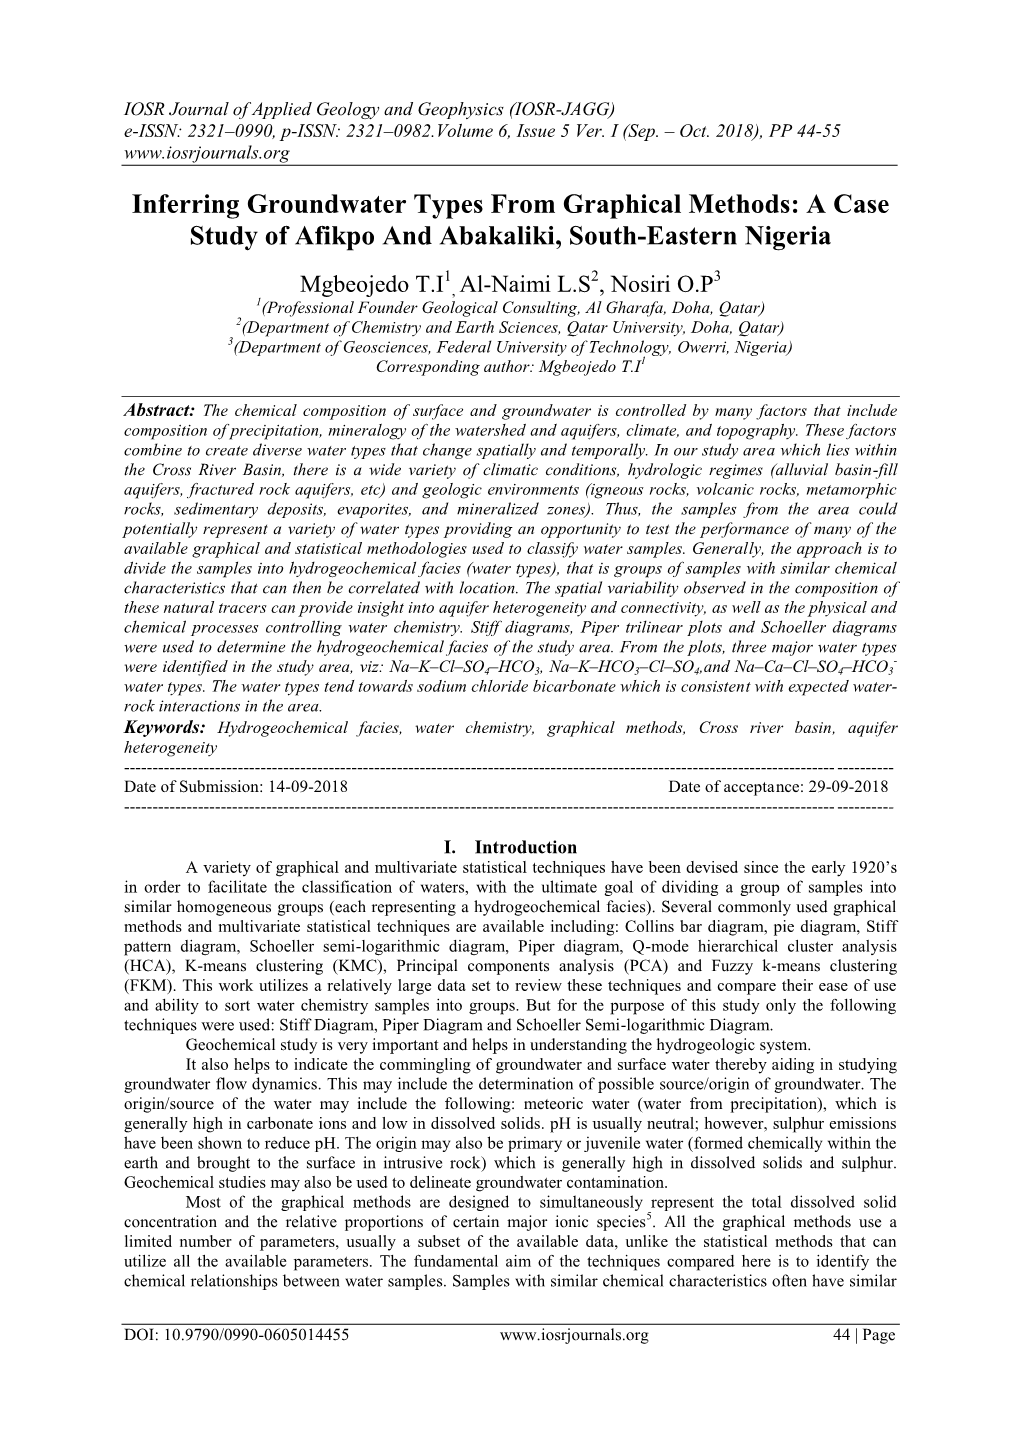 Inferring Groundwater Types from Graphical Methods: a Case Study of Afikpo and Abakaliki, South-Eastern Nigeria